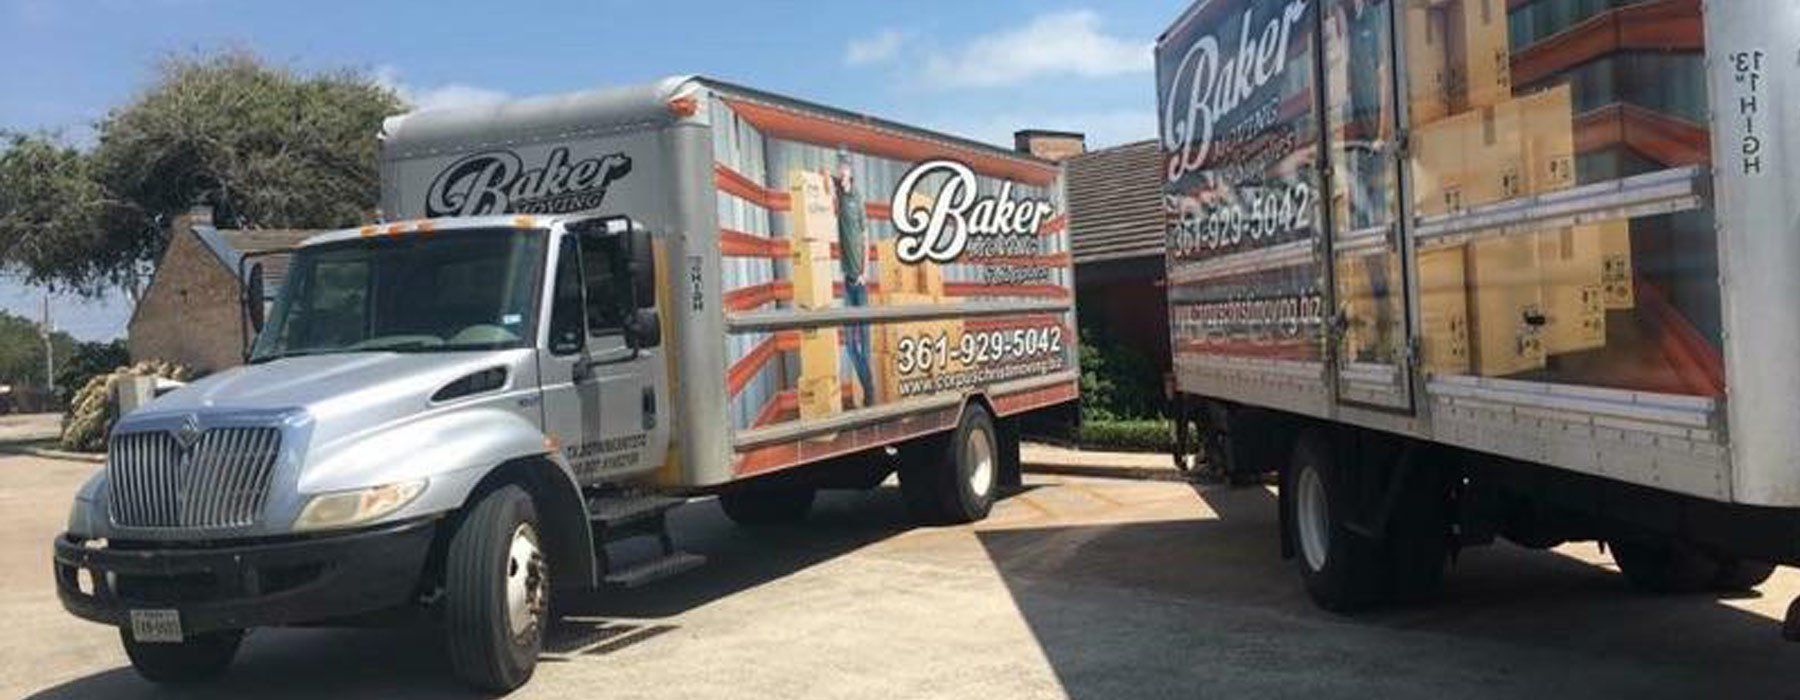 Rates — Front view of Baker Truck in Dr, Corpus Christi, TX